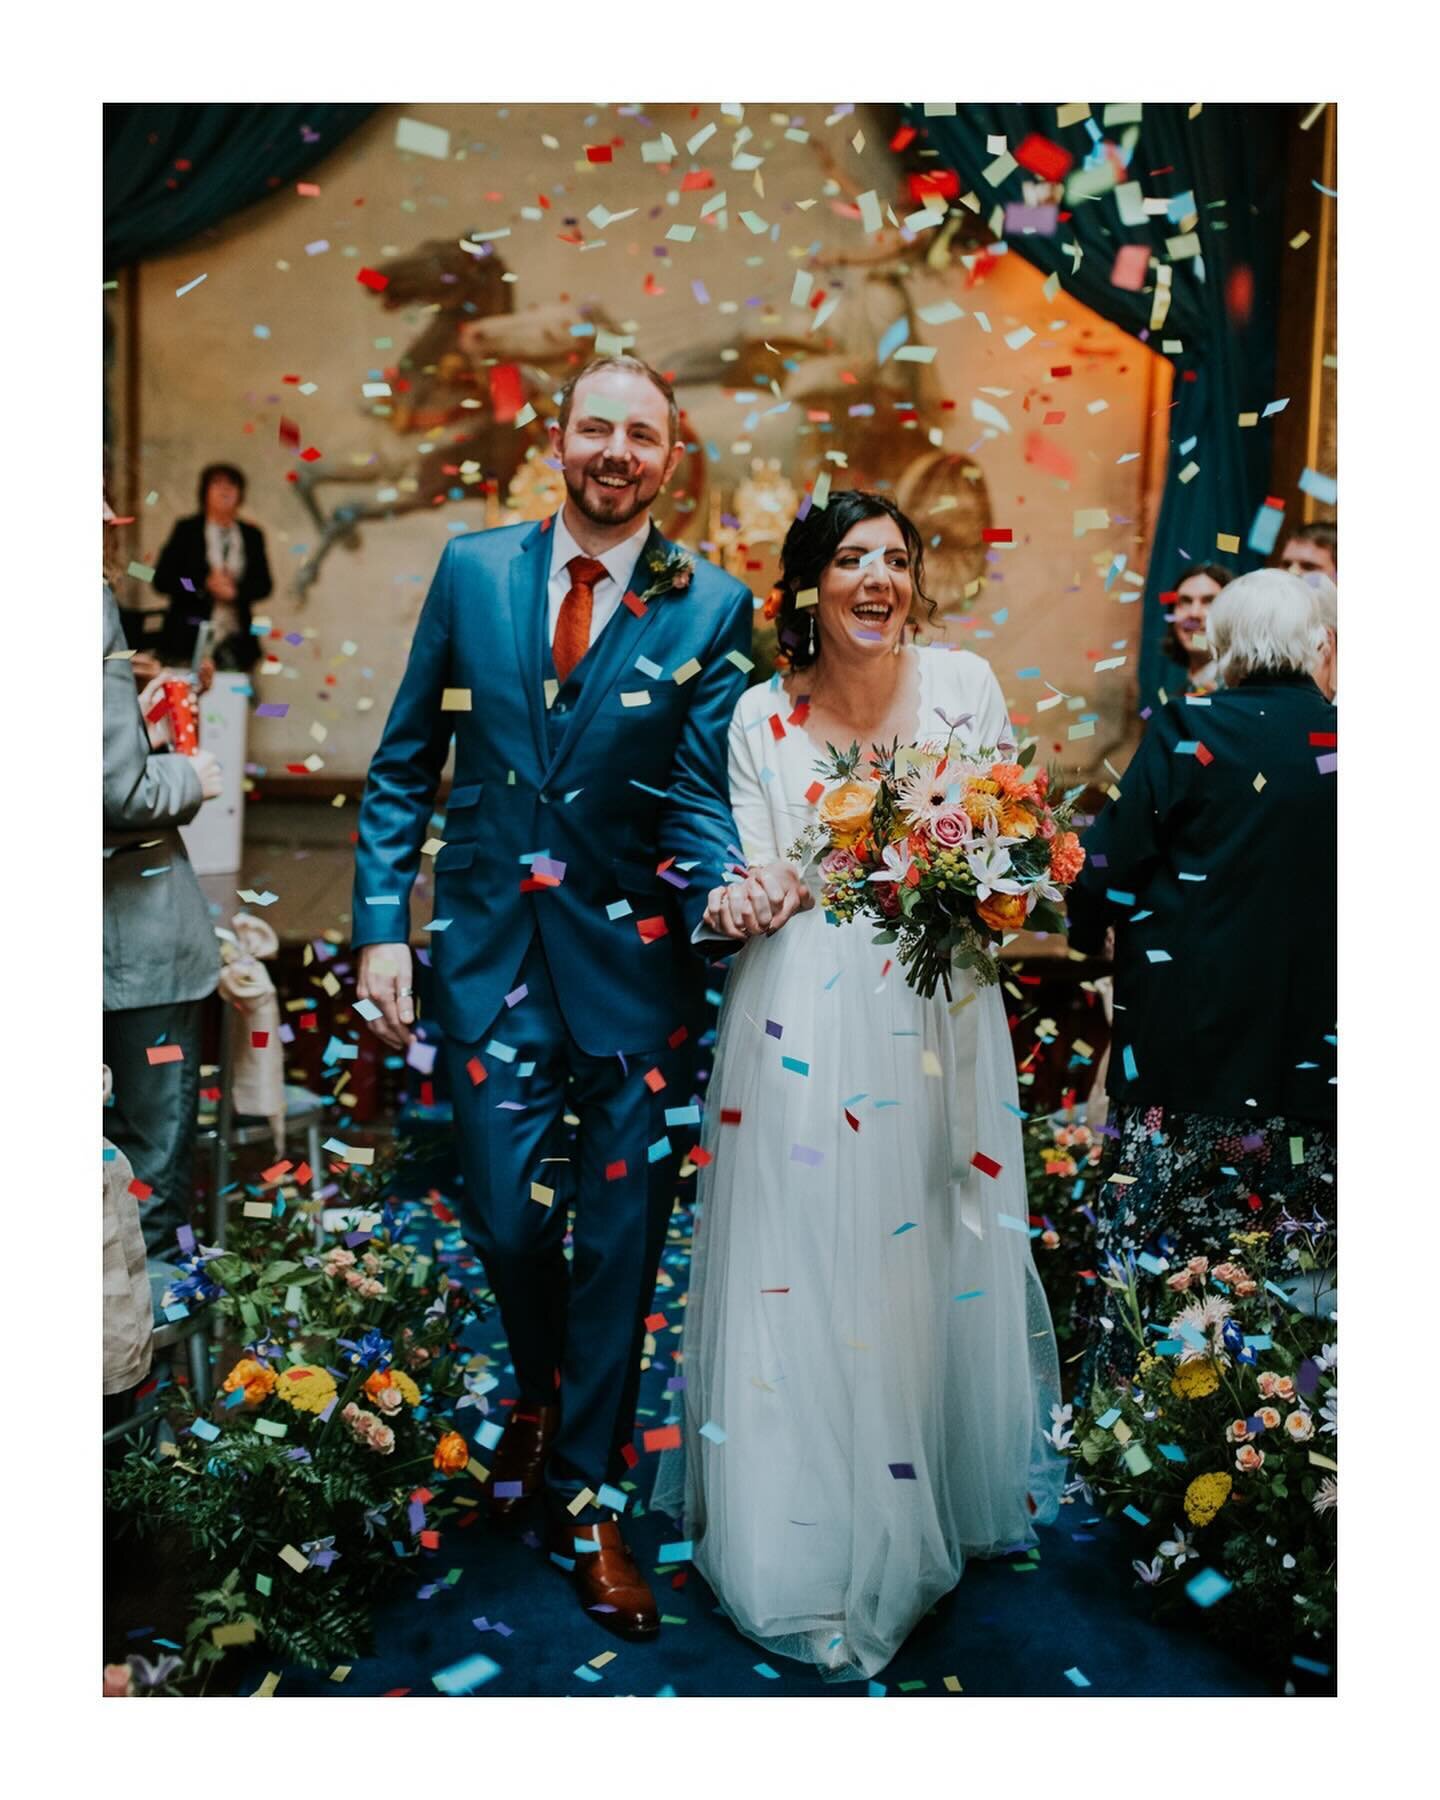 Just a dedication to confetti on this rainy day ☔️ 

It took me way too long to choose a song for this post but here we are .. 🎉🙌🍾👏

Many reasons why confetti are some of favourite shots on a wedding day. Oh and a cheeky smoke bomb moment because